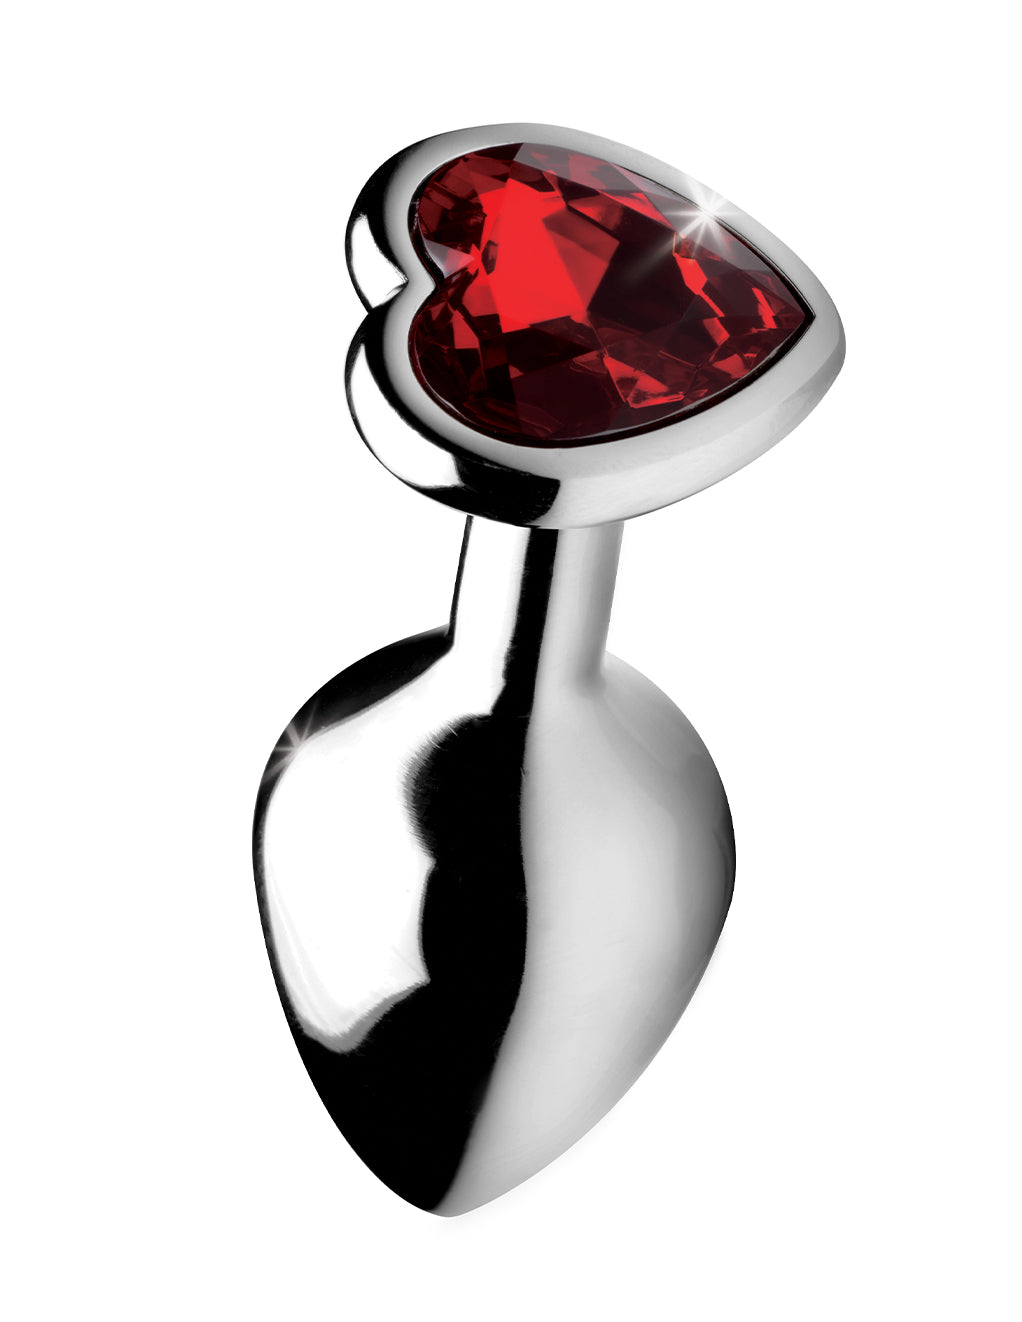 Booty Sparks Red Heart Gem Anal Plug- Medium- Heart Top Right